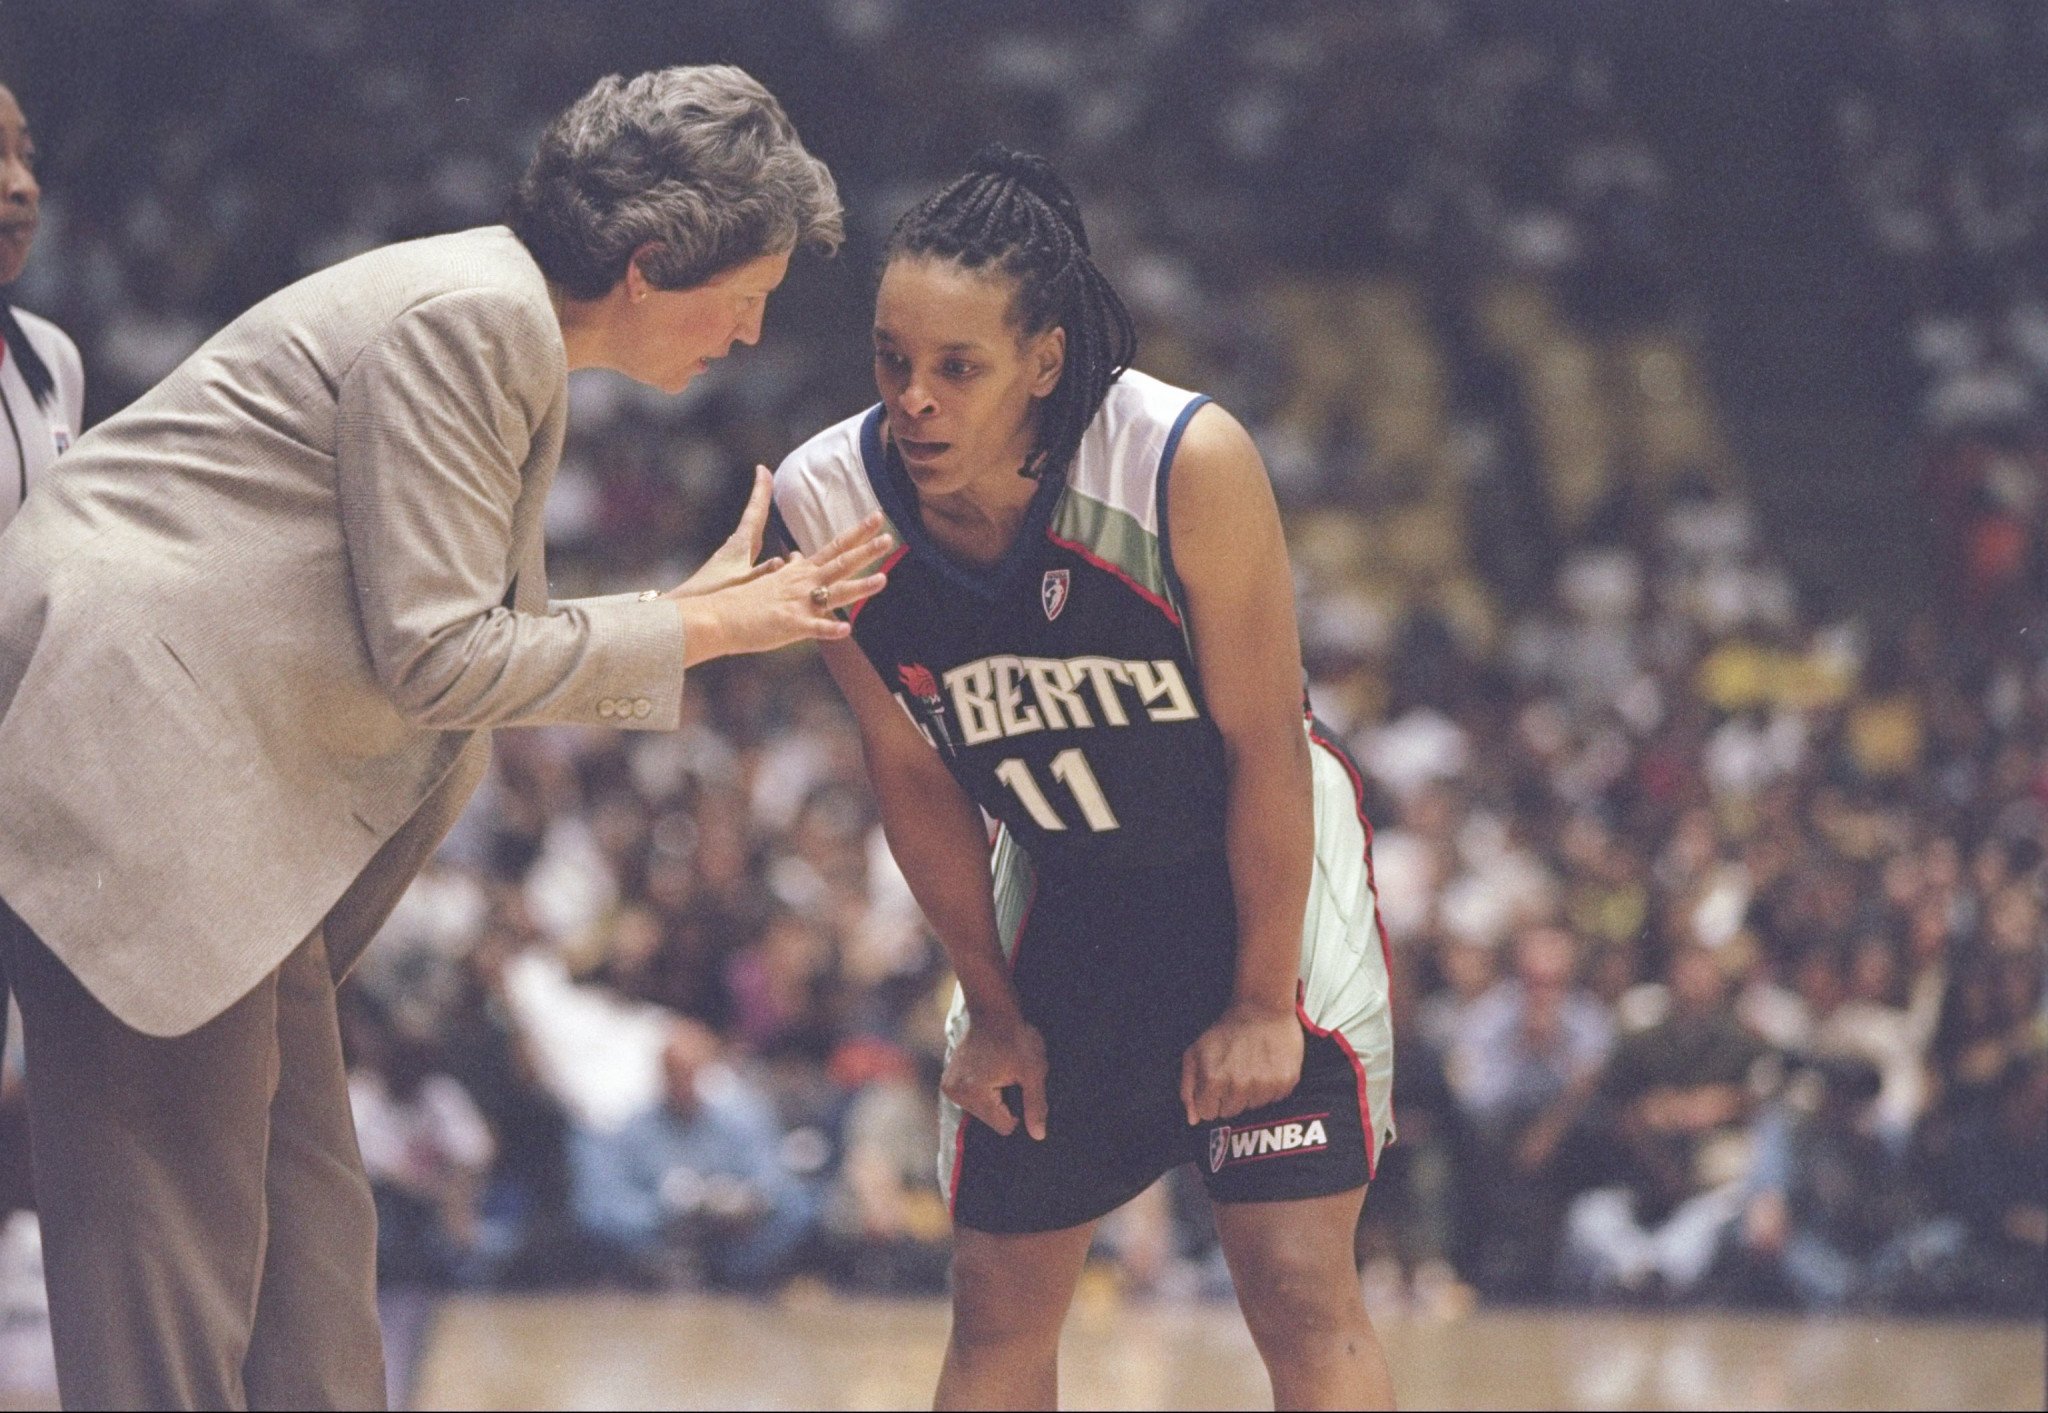 Nancy Darsch was the first coach of WNBA team New York Liberty ©Getty Images